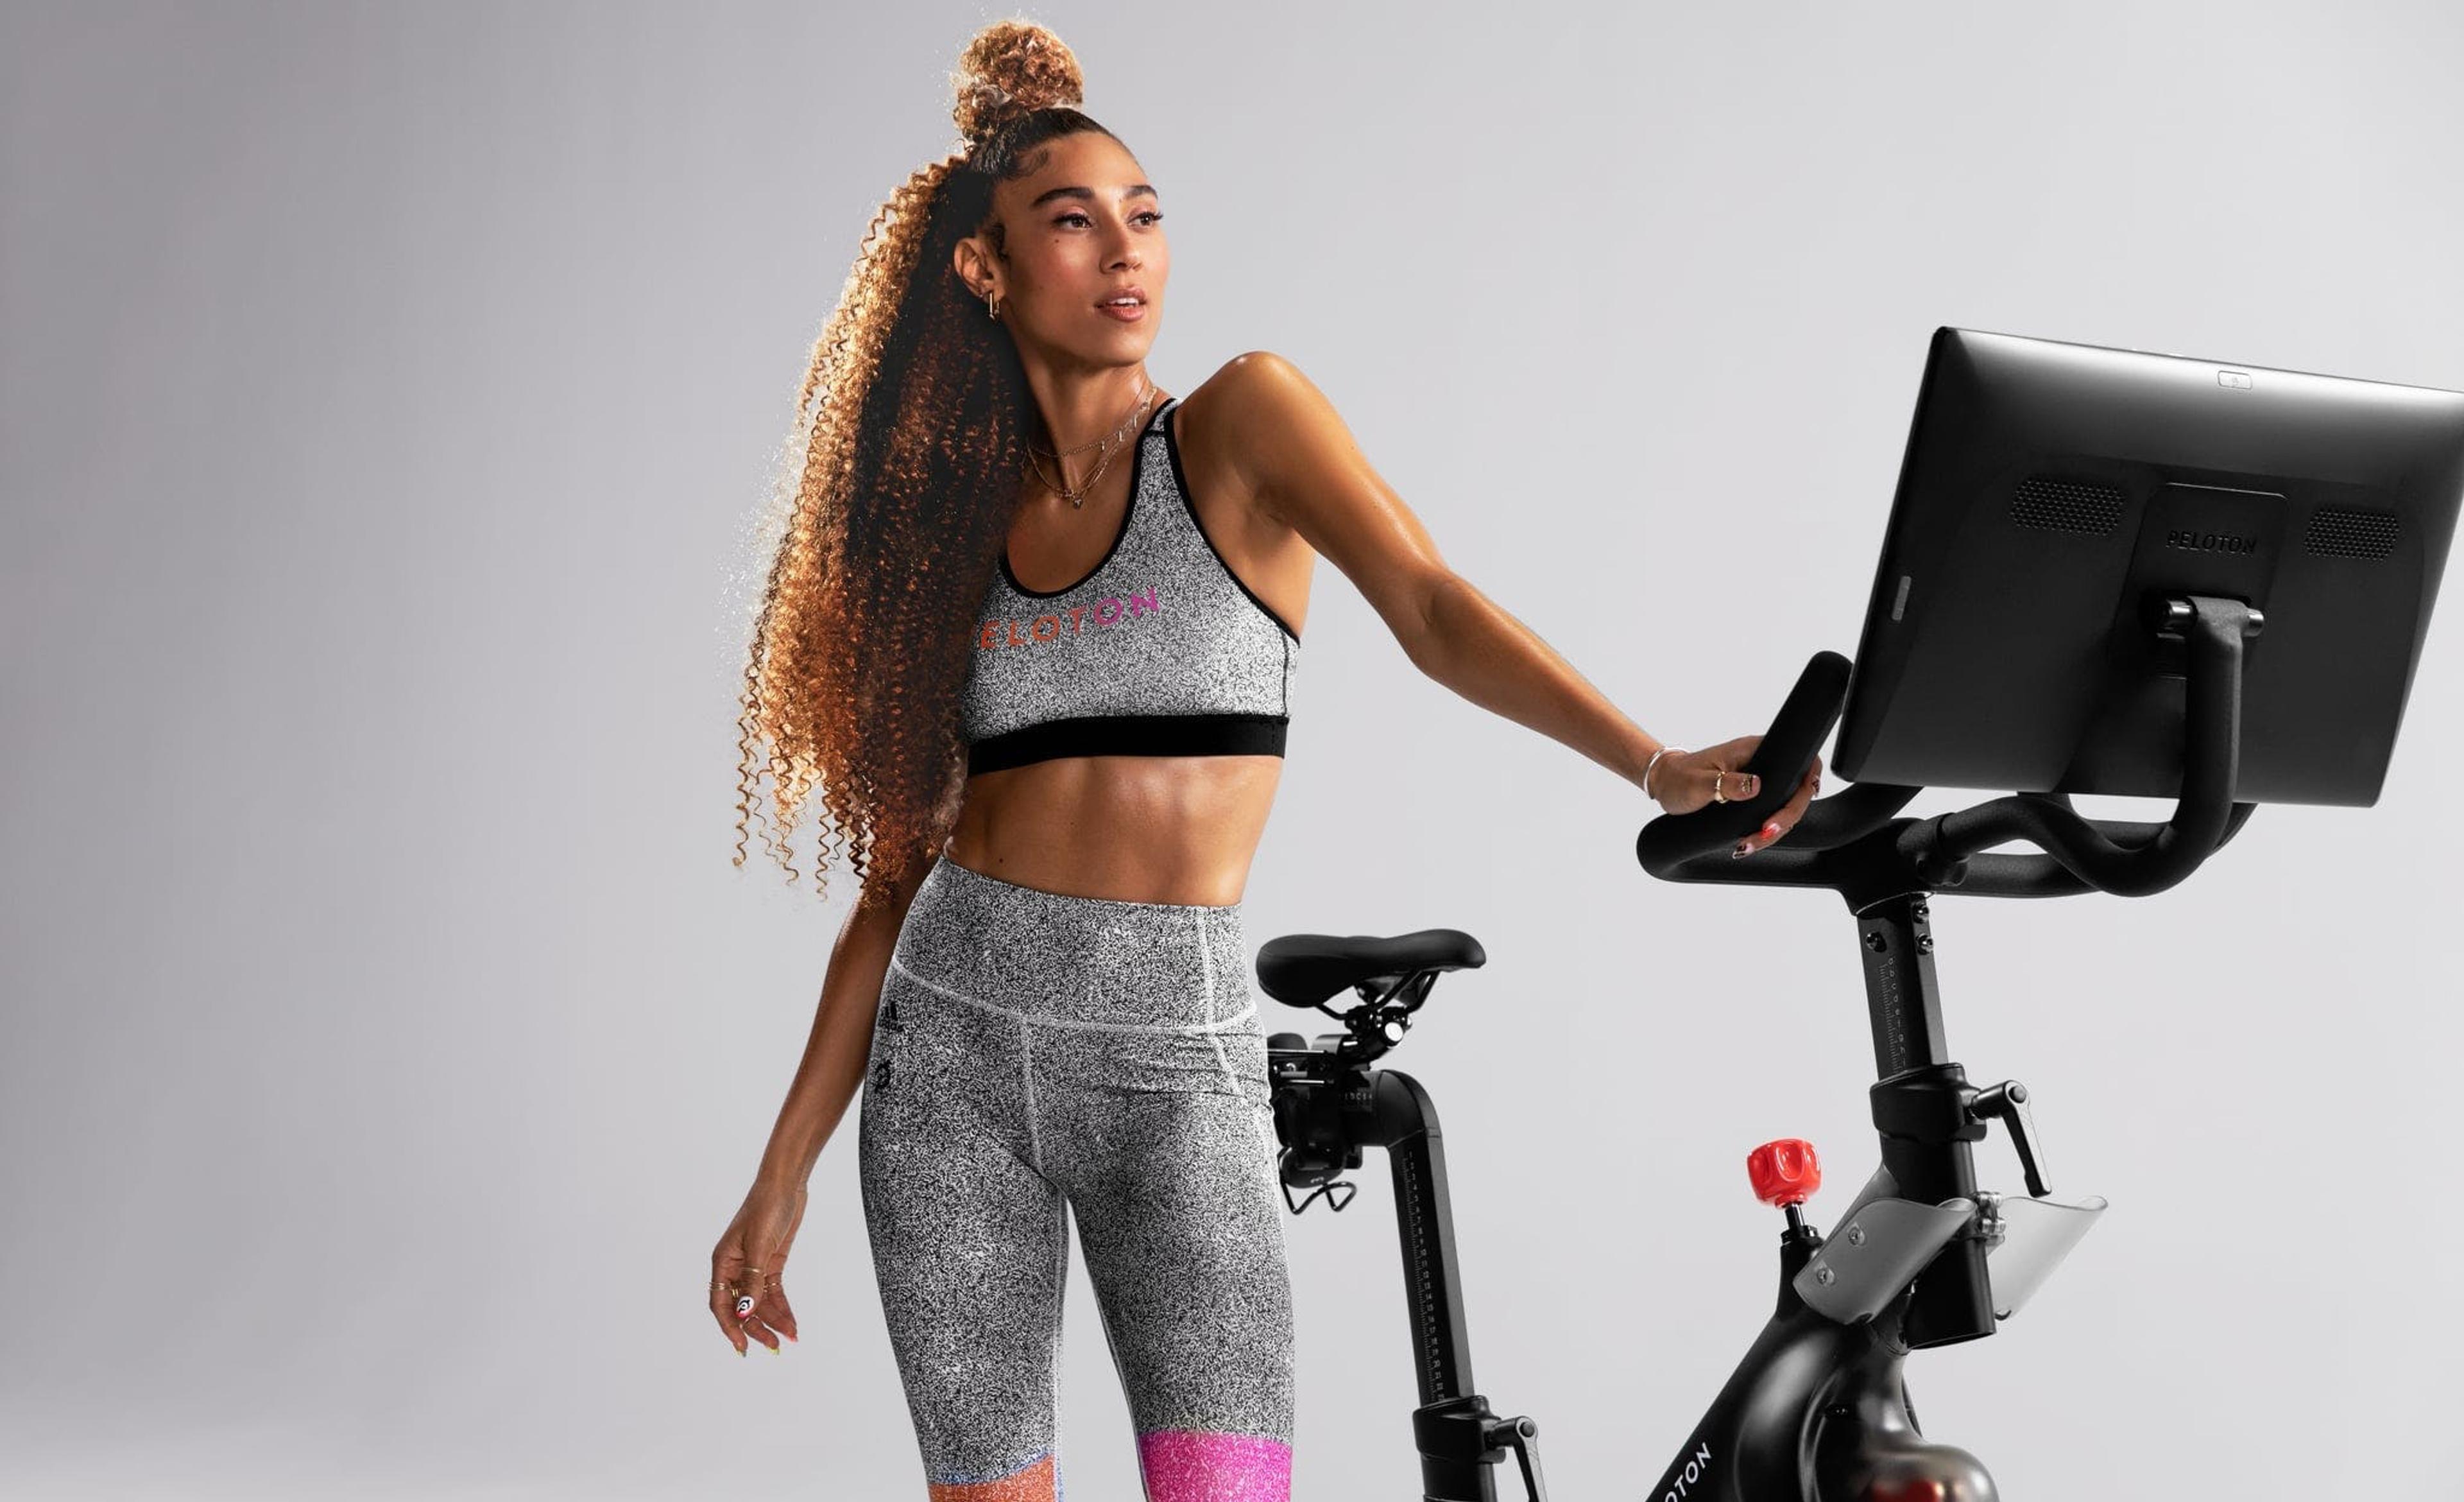 Giving Peloton’s fans something to rave about with a brand new shopping experience